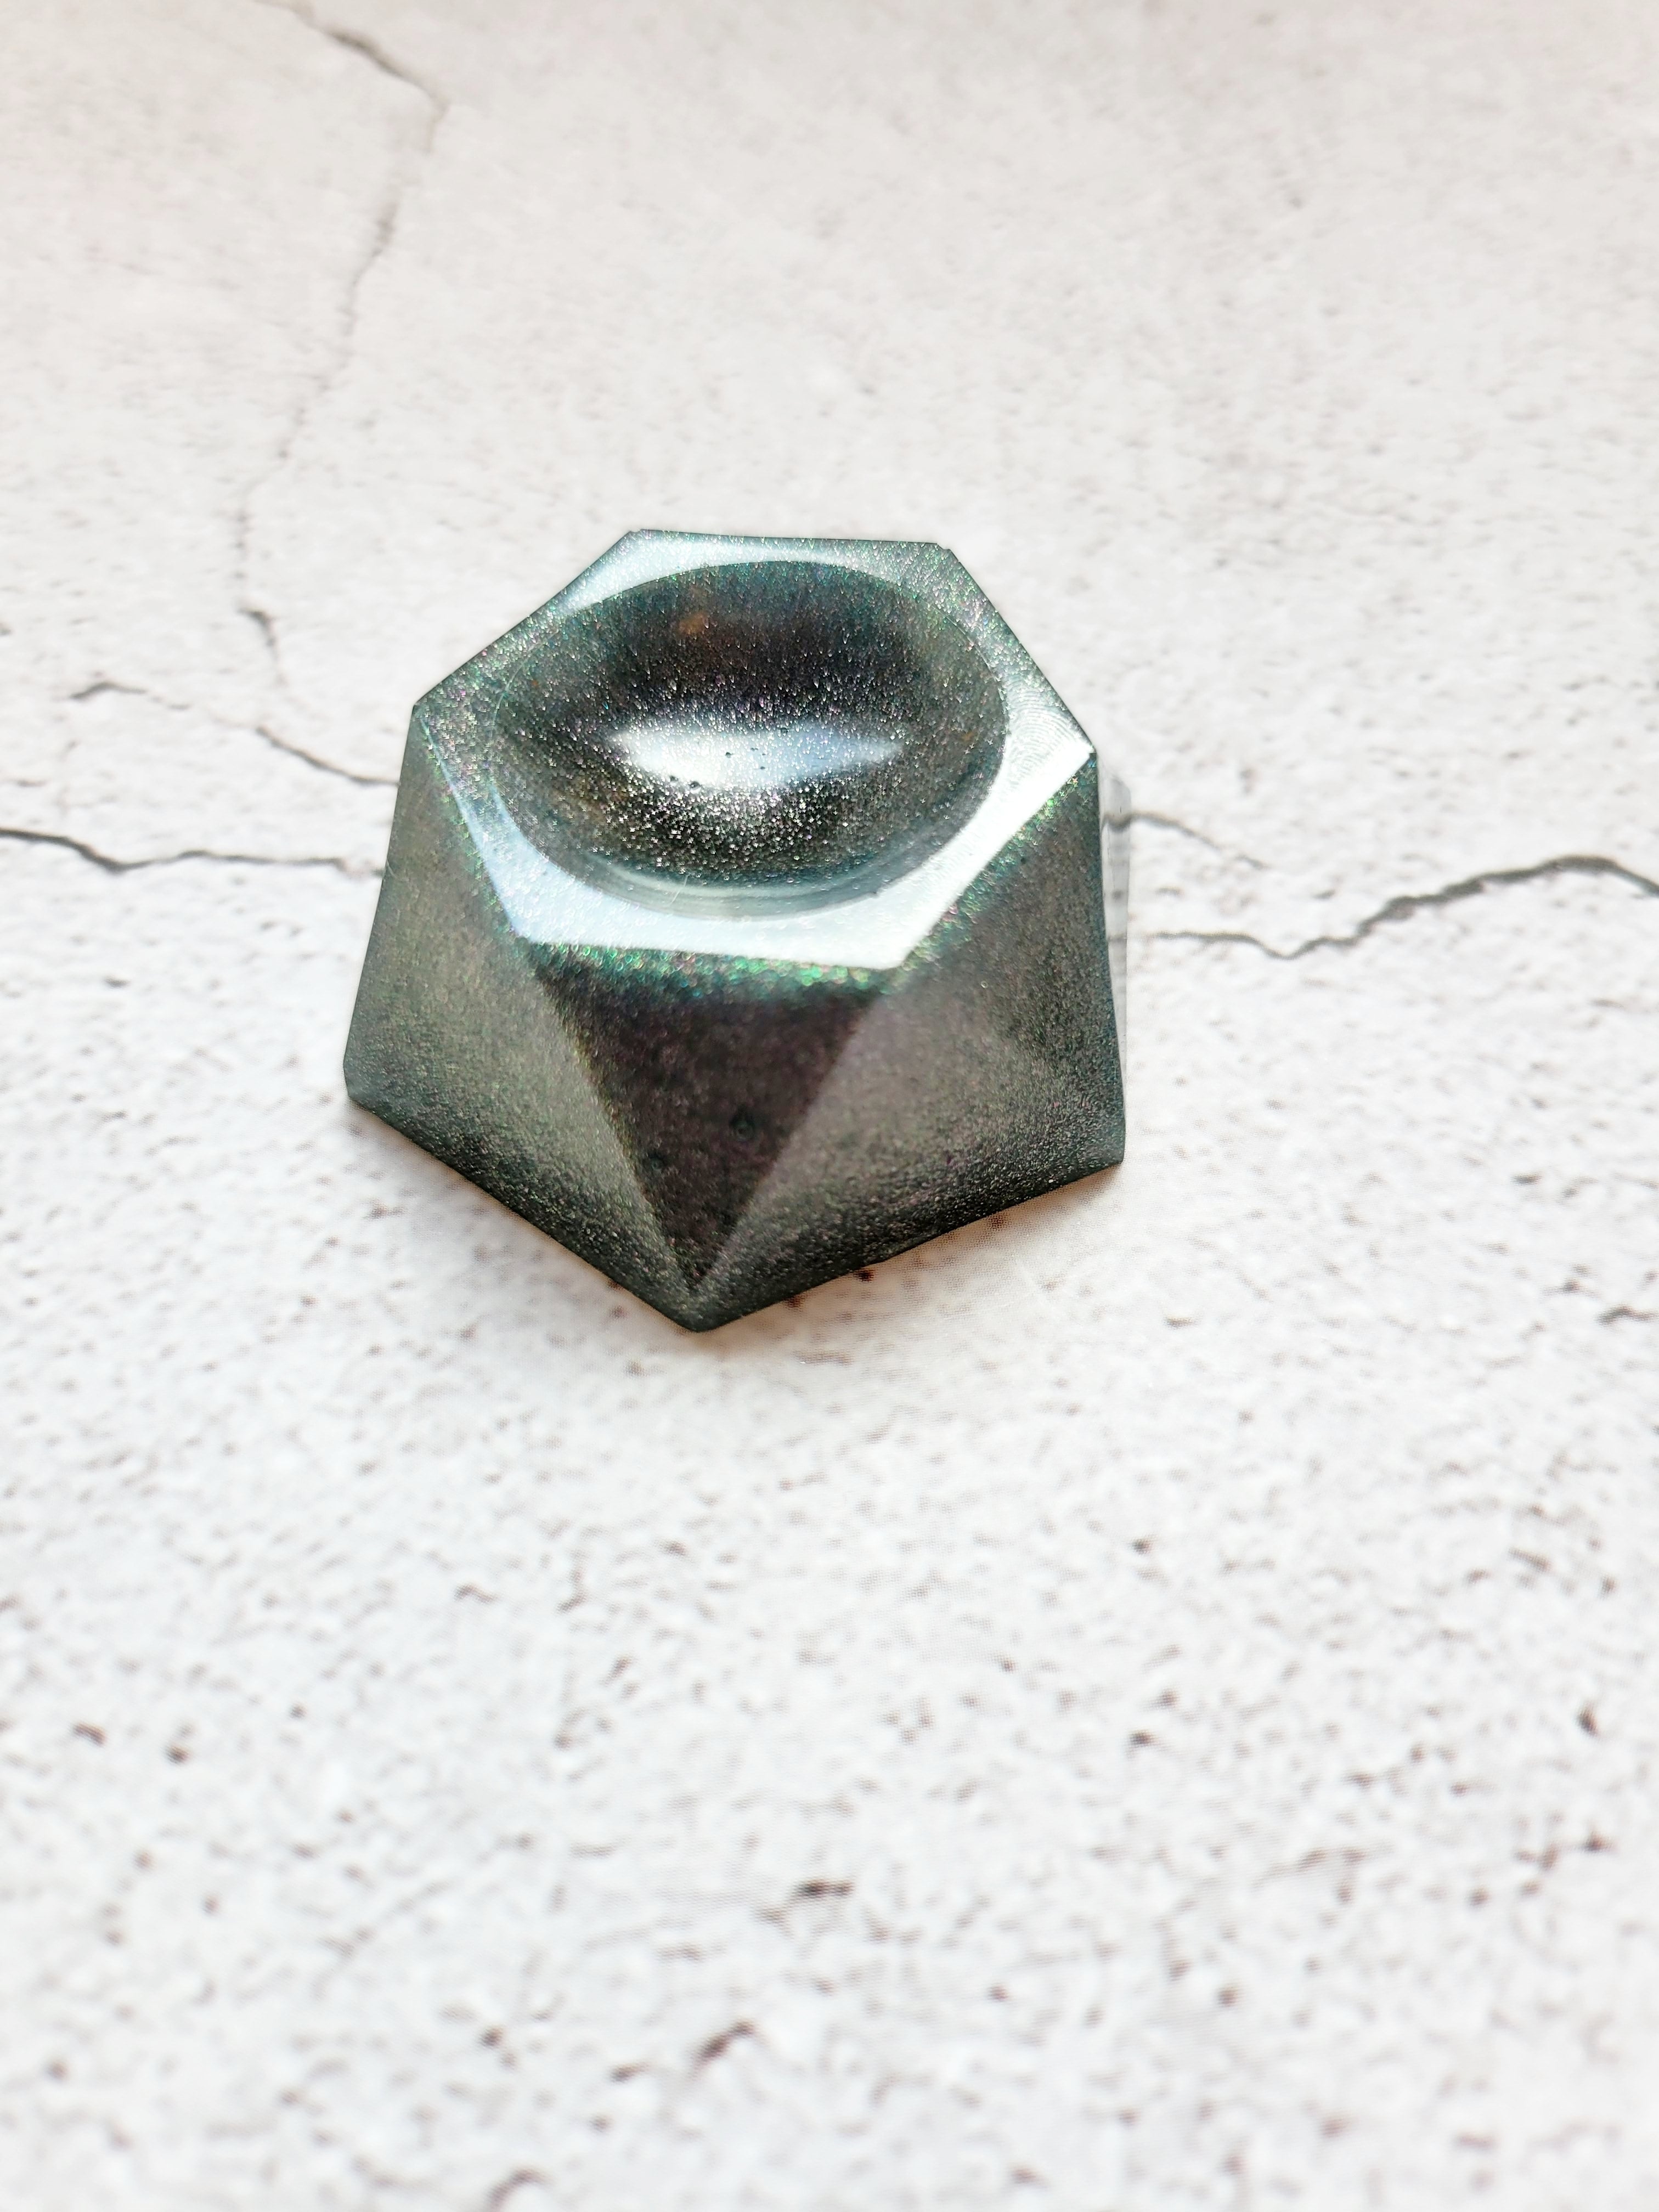 A side view of a hexagonal stand for dice or tabletop familiar. It's pale gray with sparks of color.